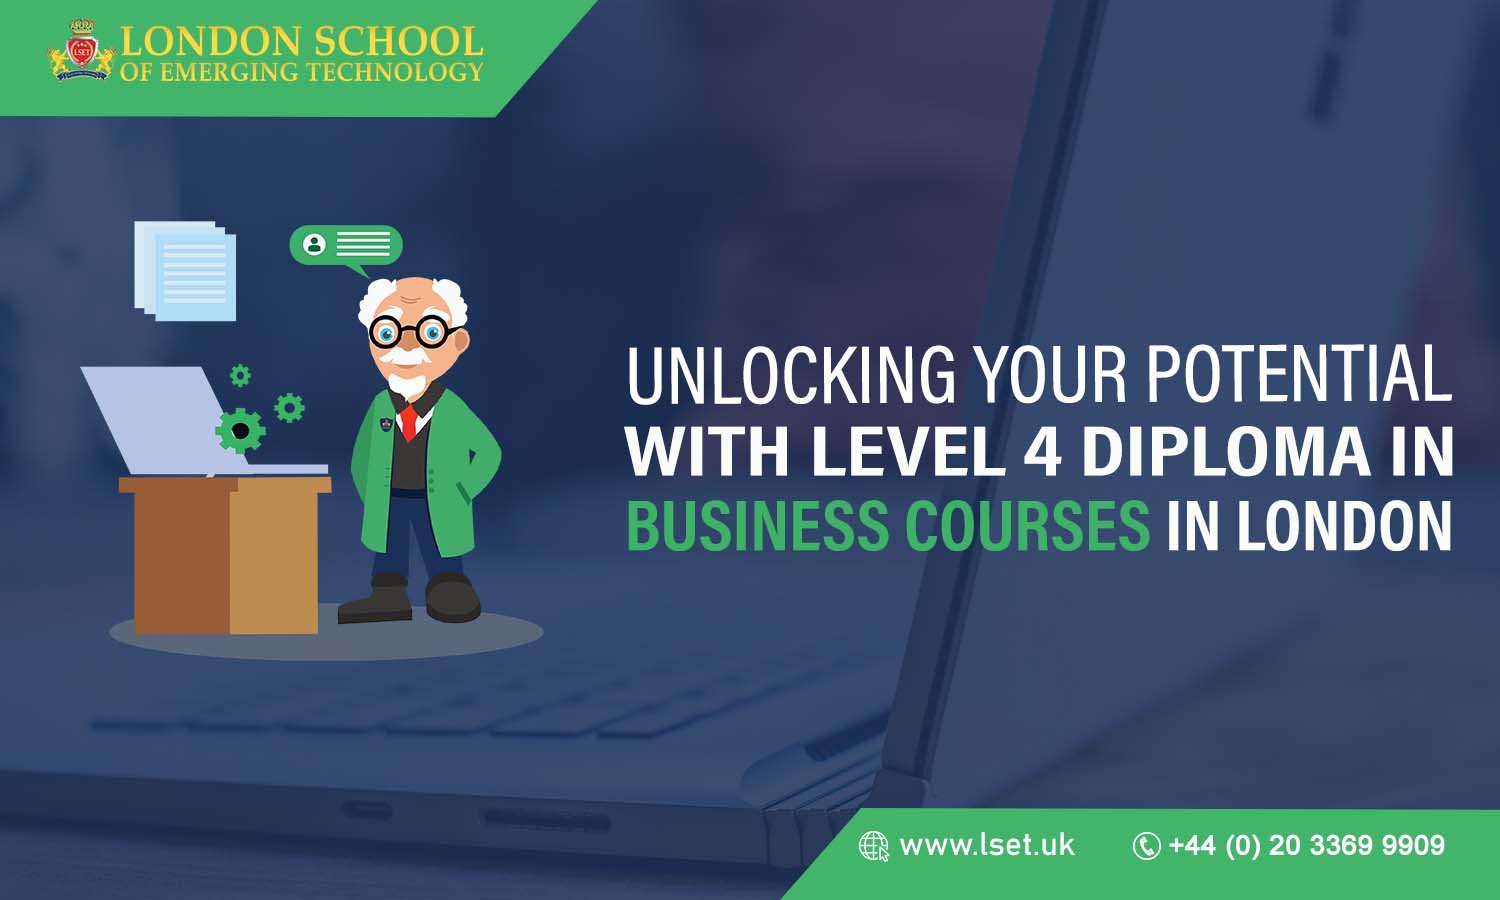 Unlock Your Potential with Level 4 Diploma in Business Courses in London